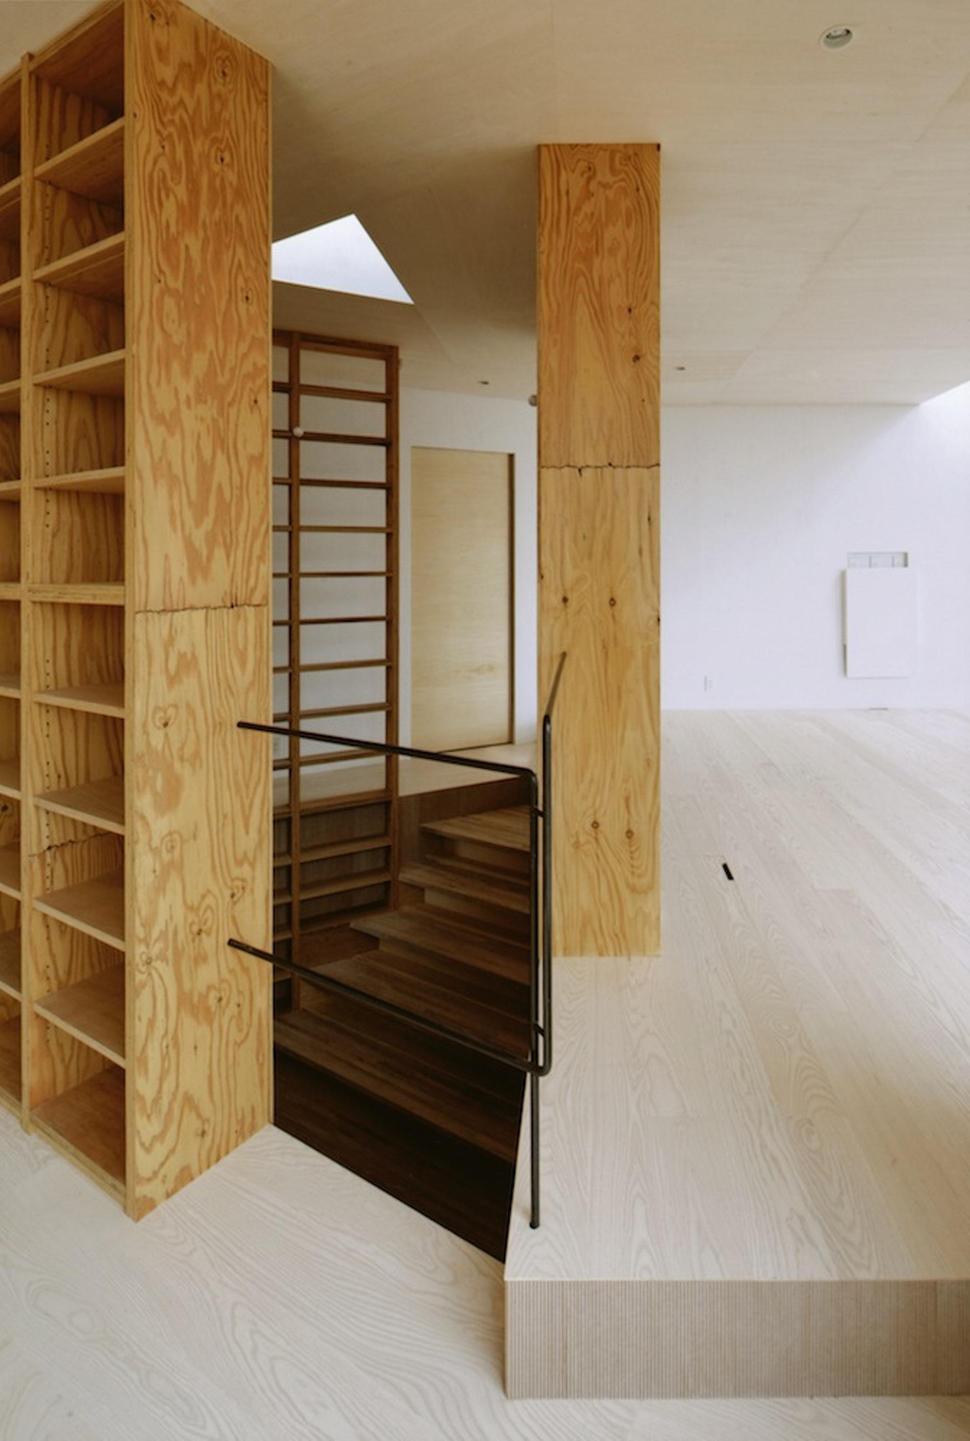 steep-slope-house-with-bookshelf-lined-interior-8-hidden-stairs.jpg